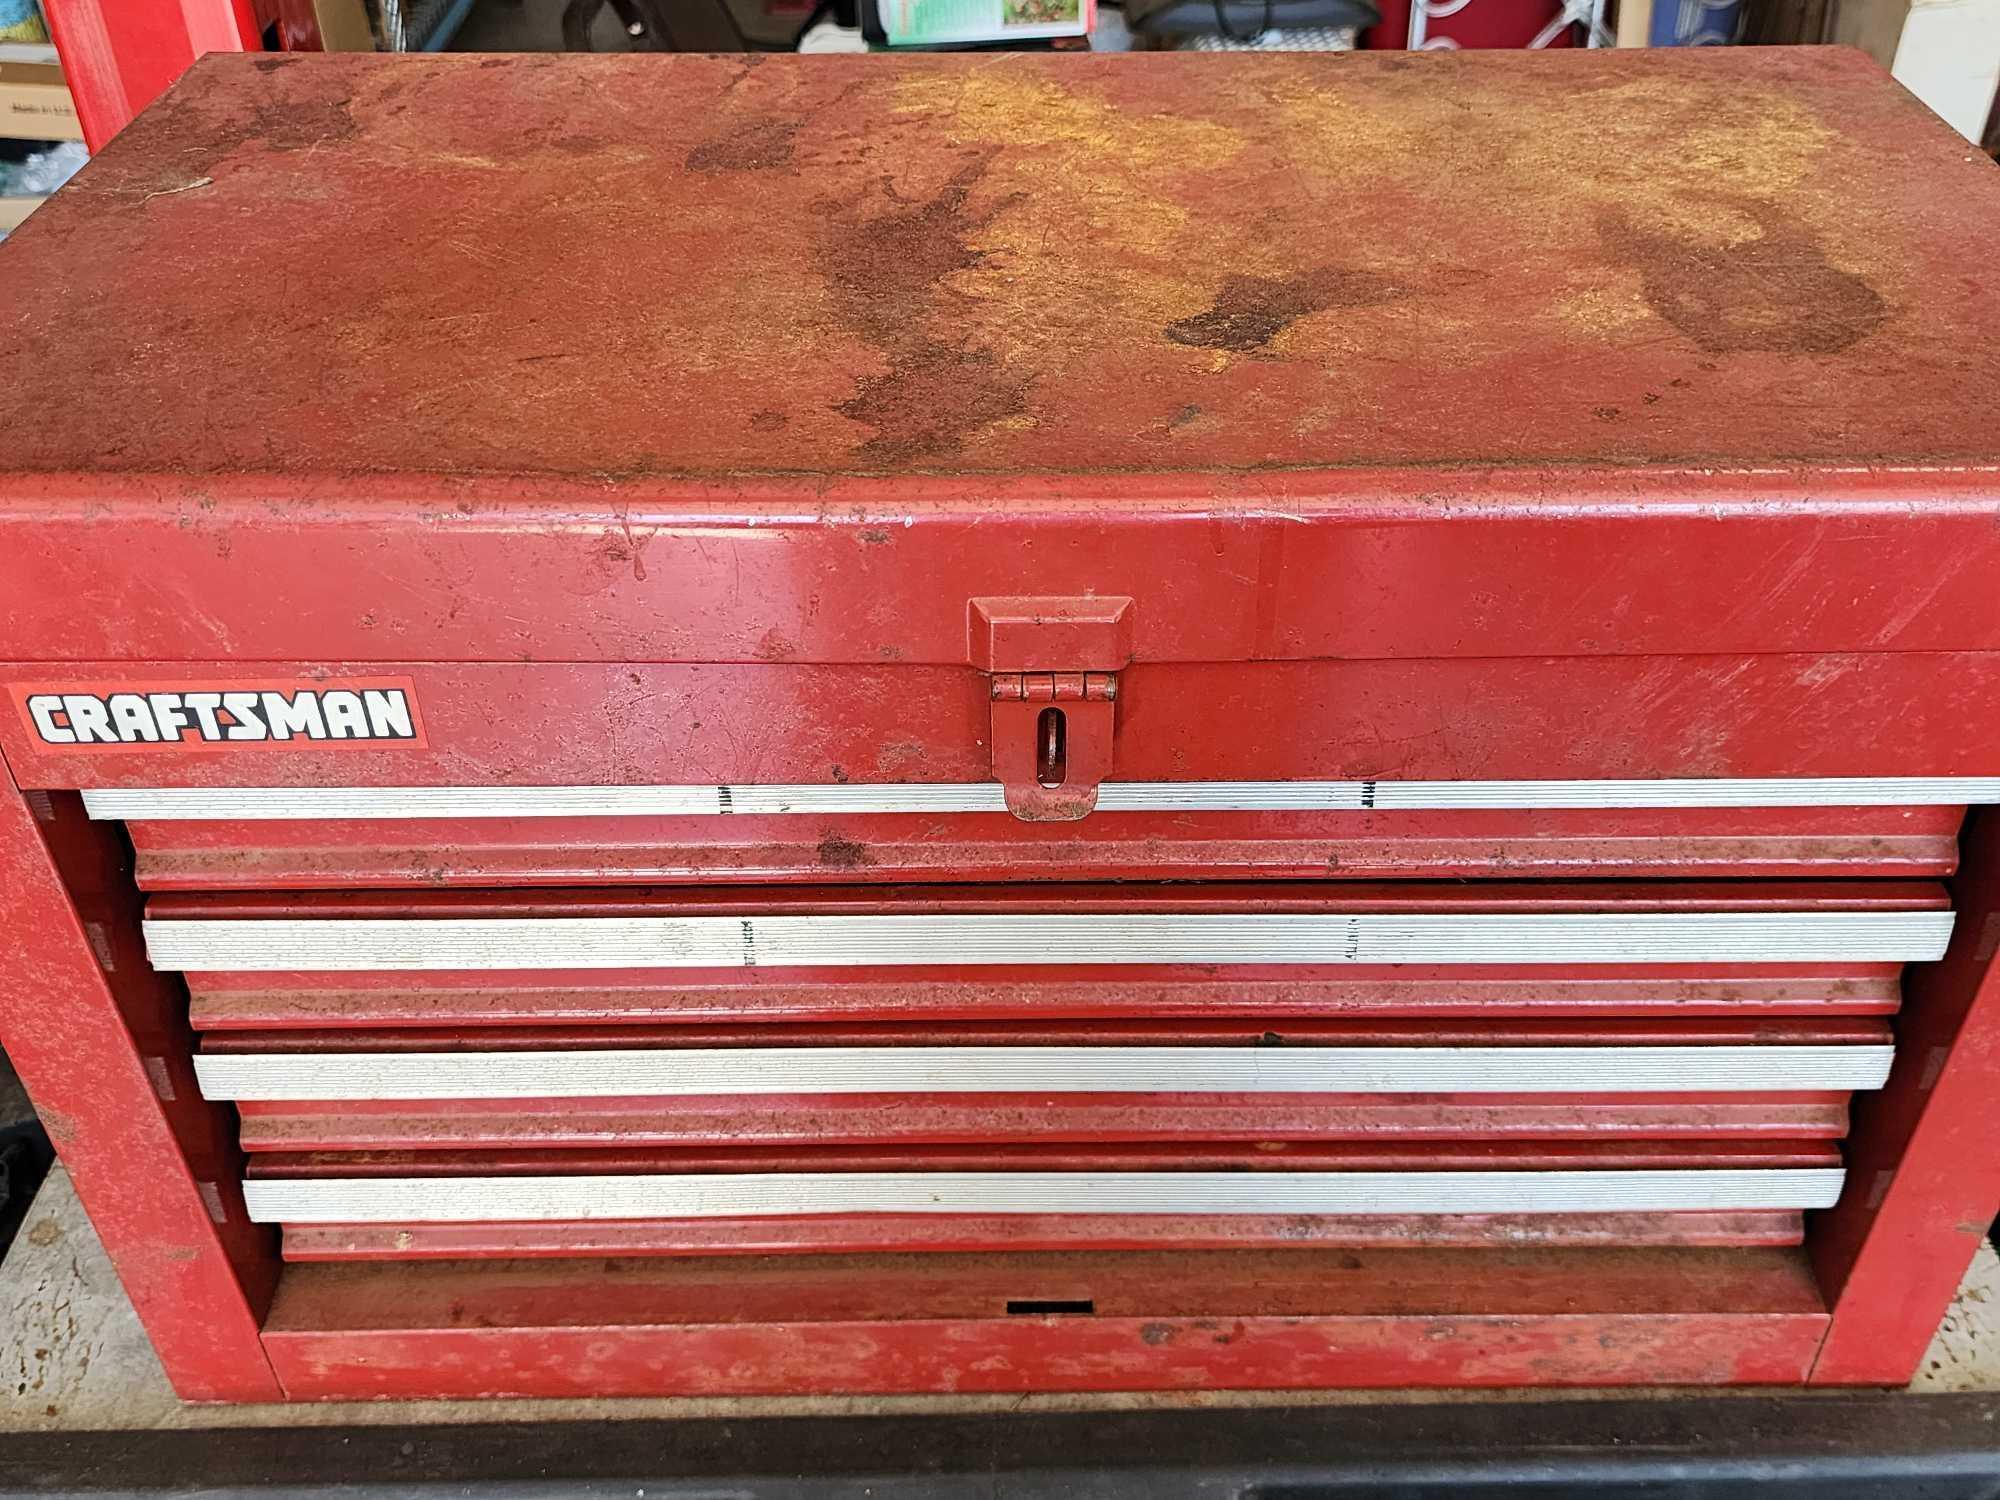 (1) Craftsman tool chest: CONTENTS INCLUDED